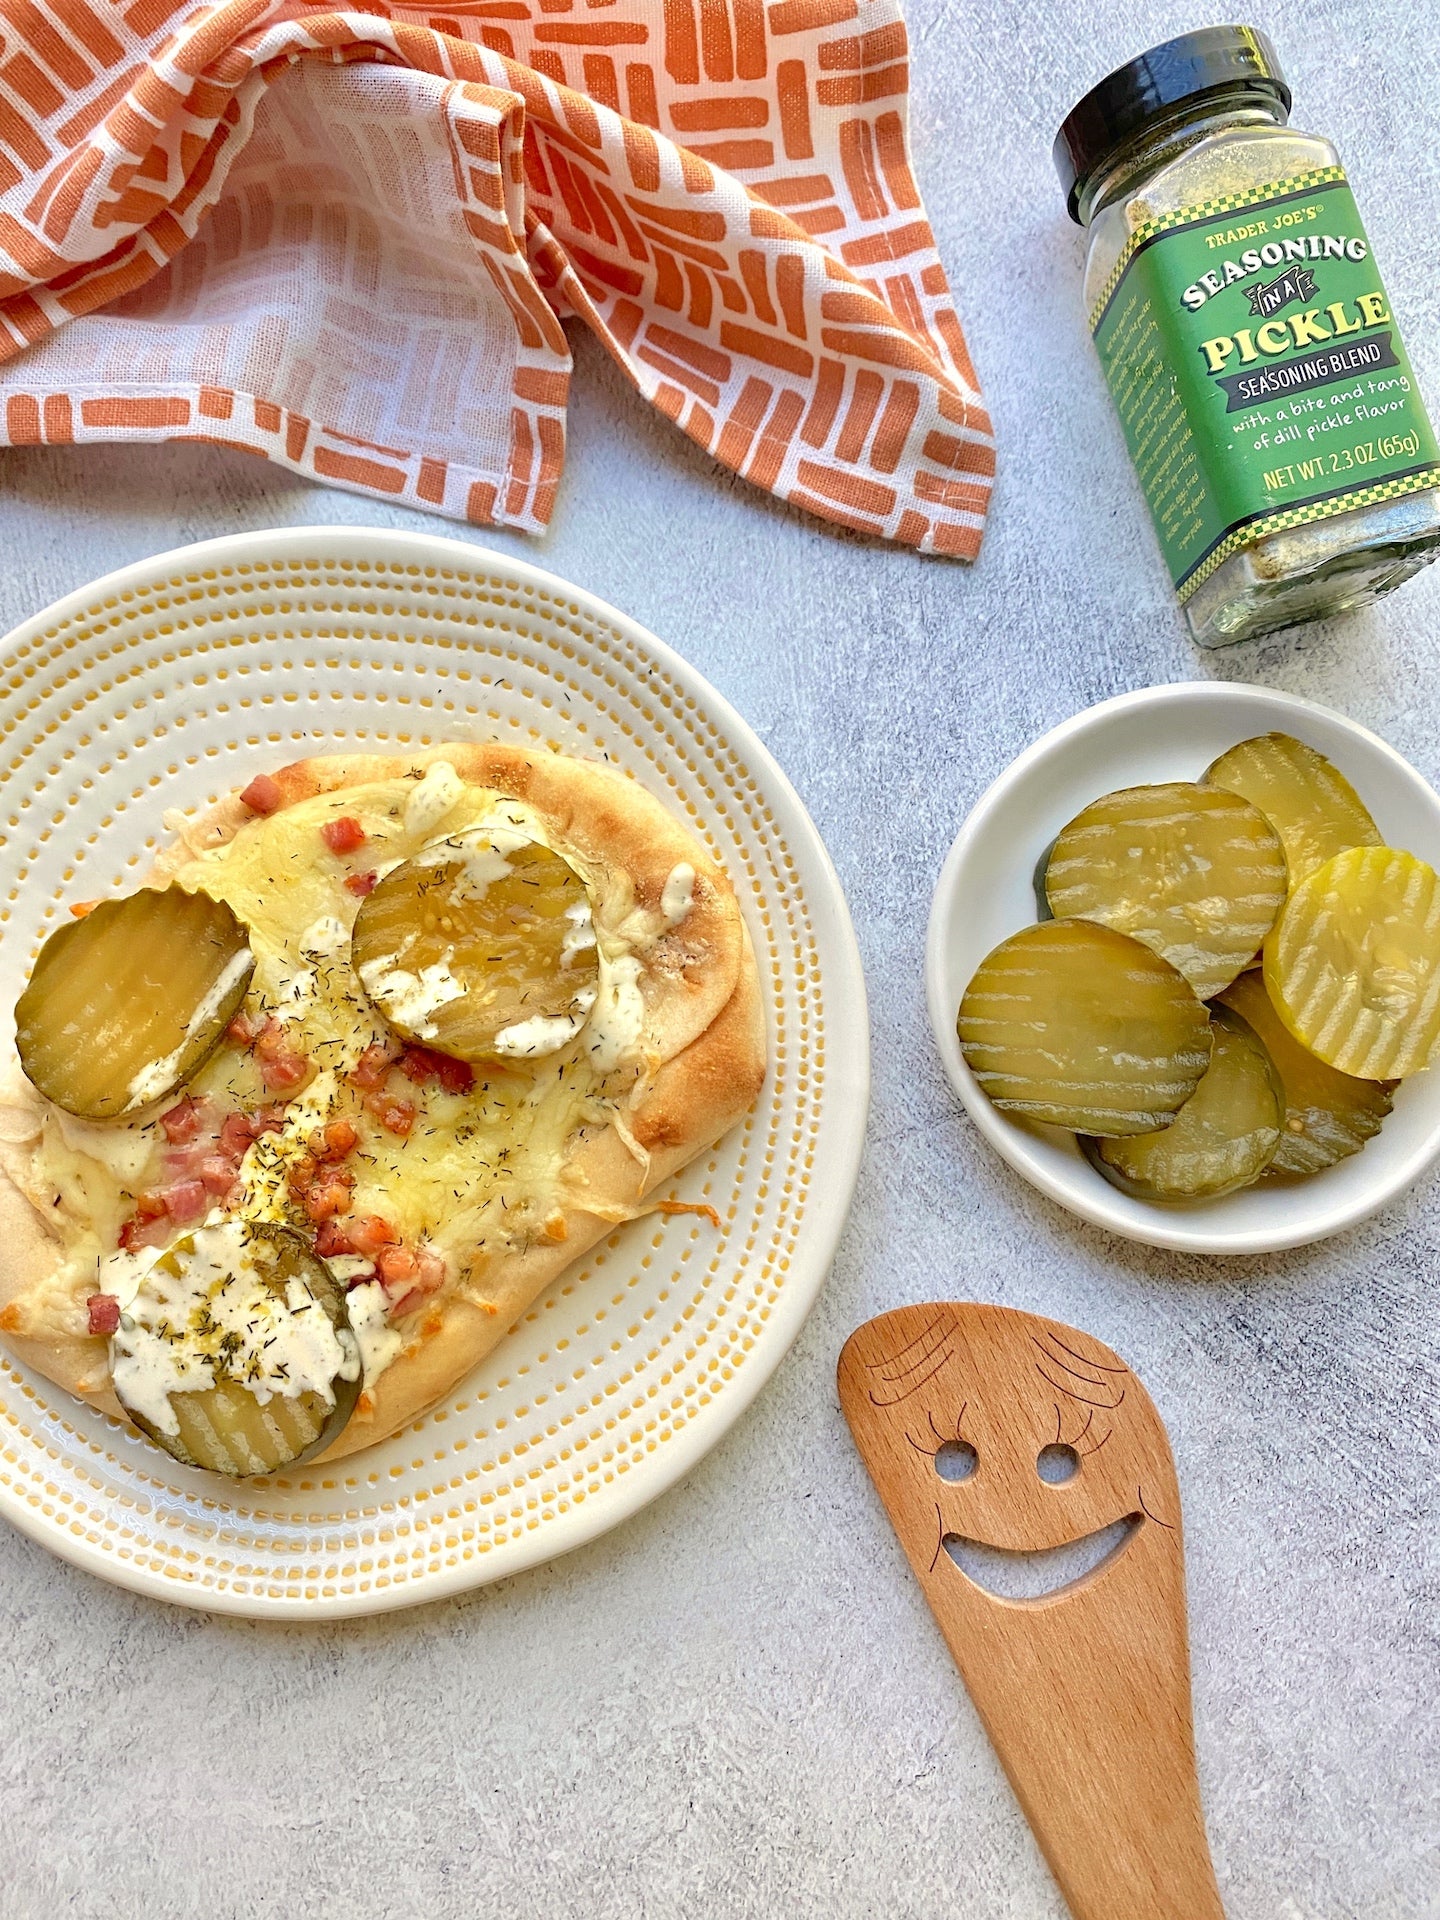 I Tried Every Pickle-Flavored Product From Trader Joe's